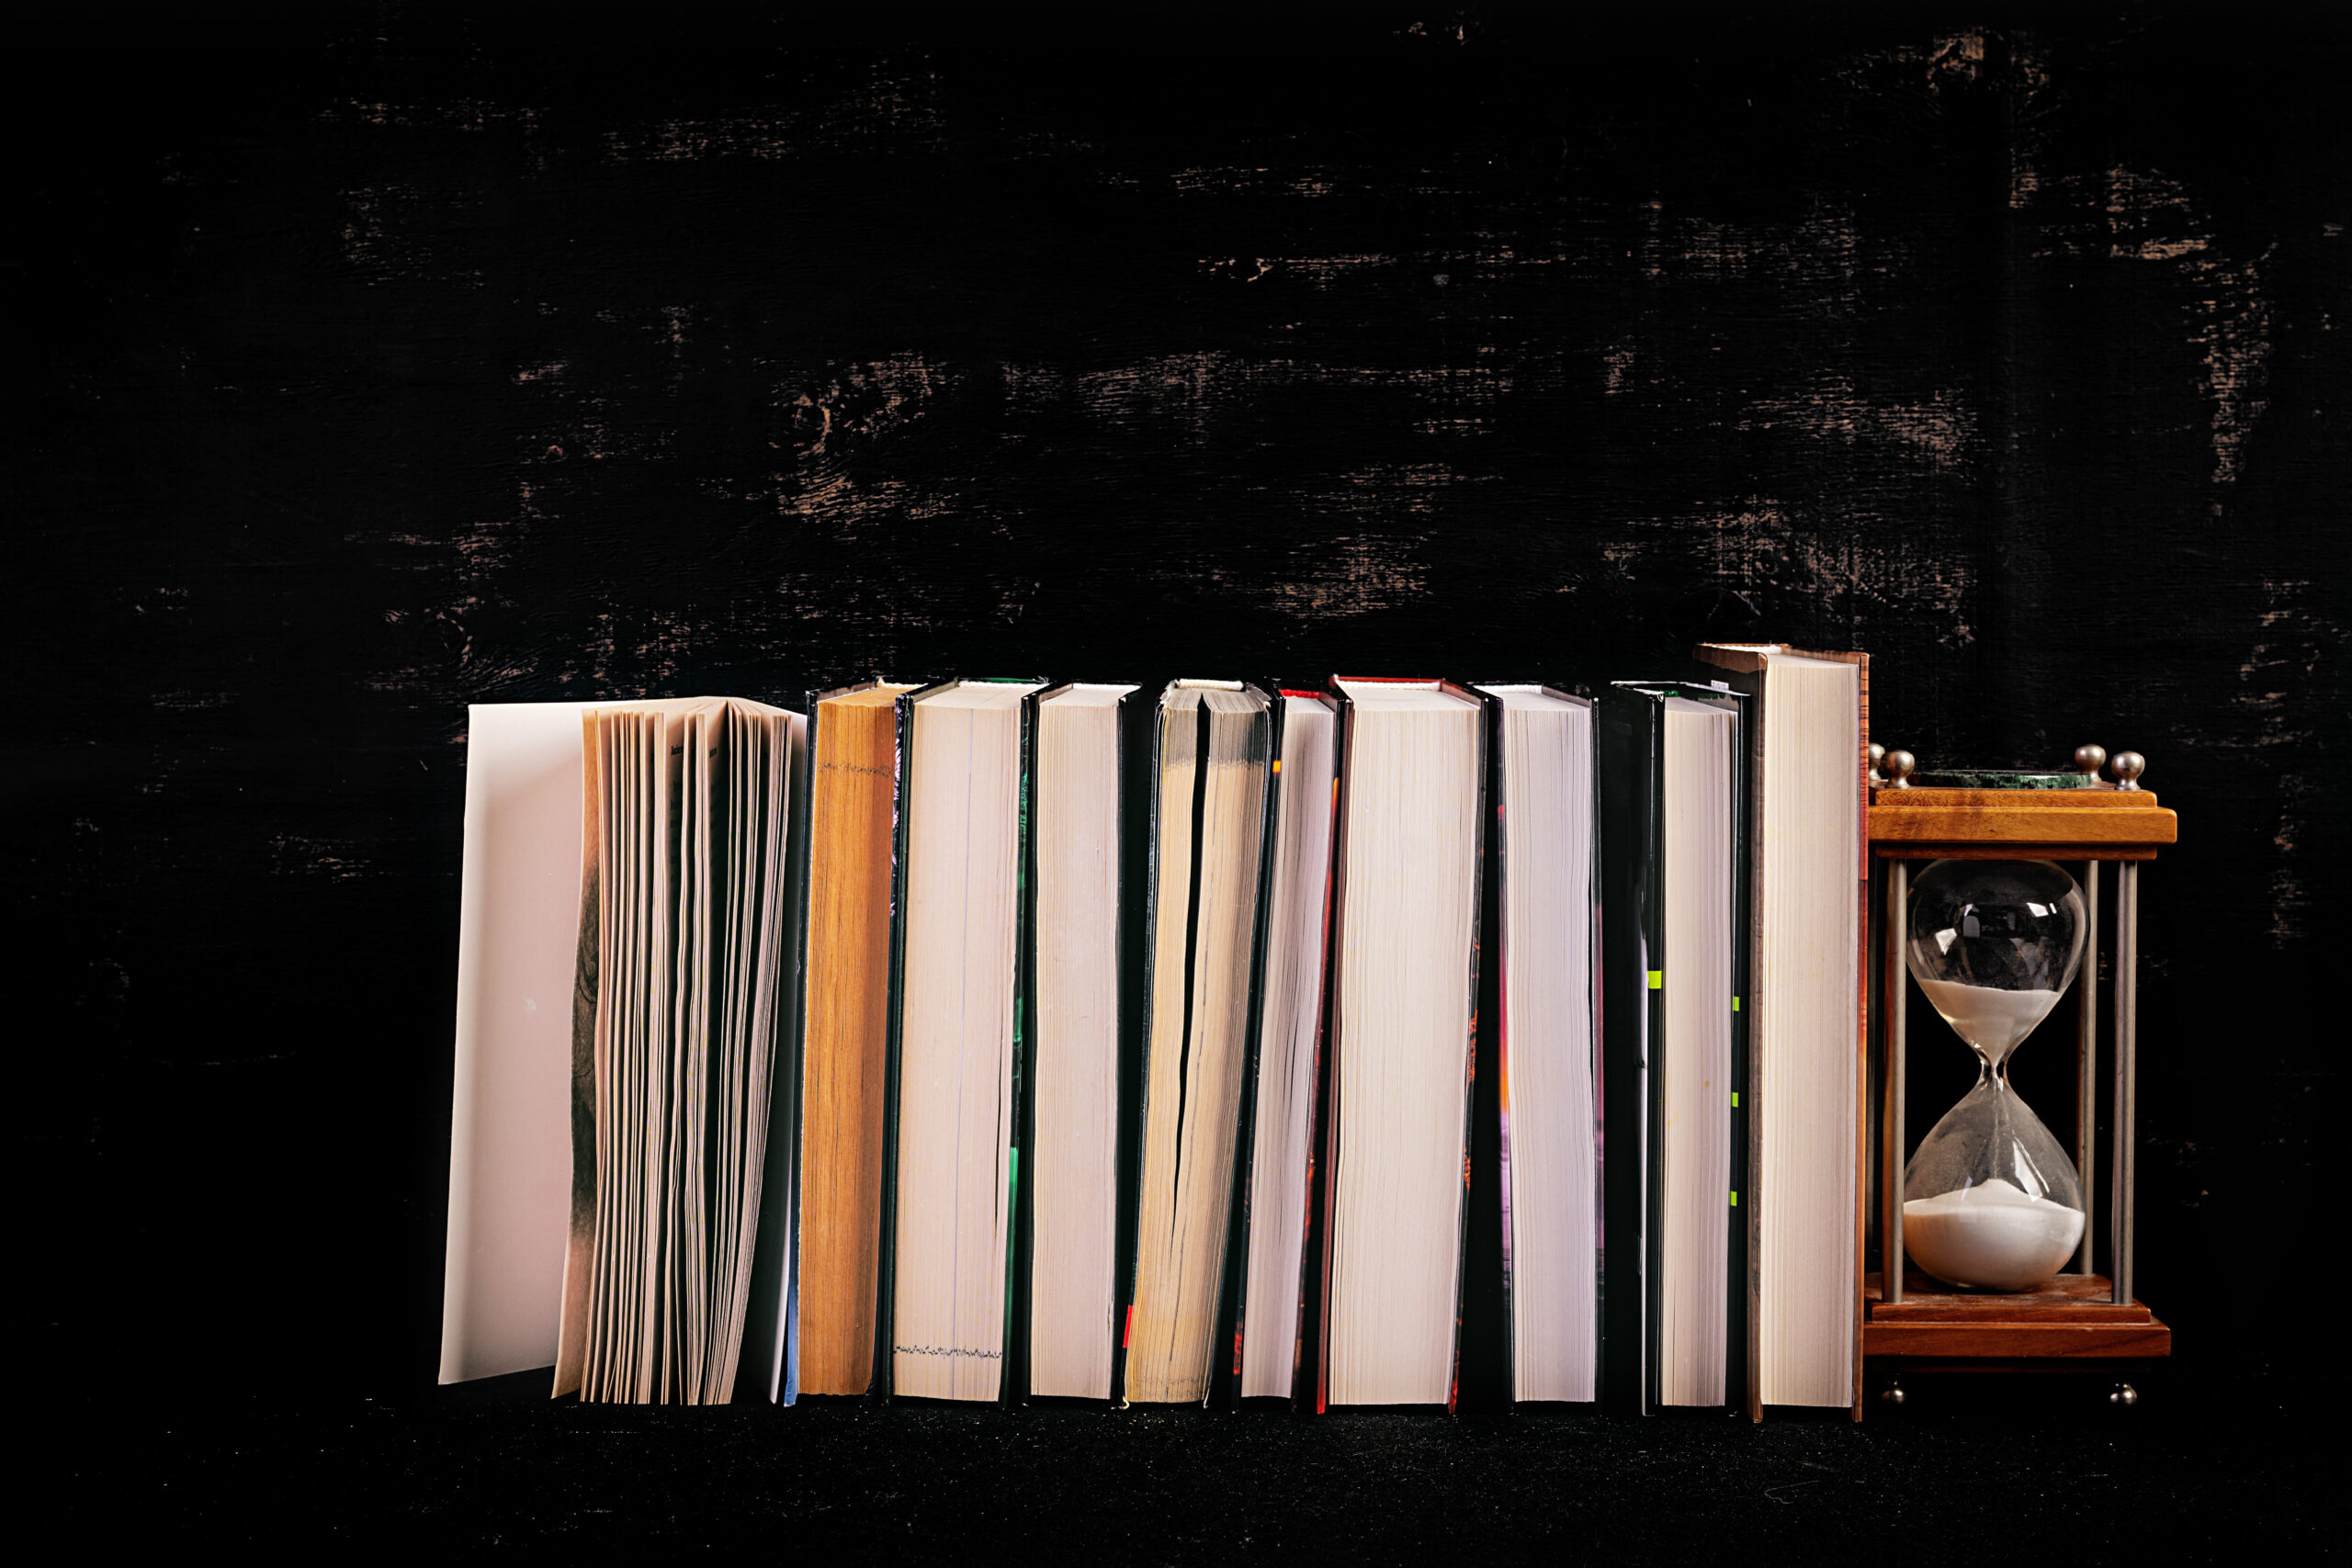 Stack of different books on dark background.